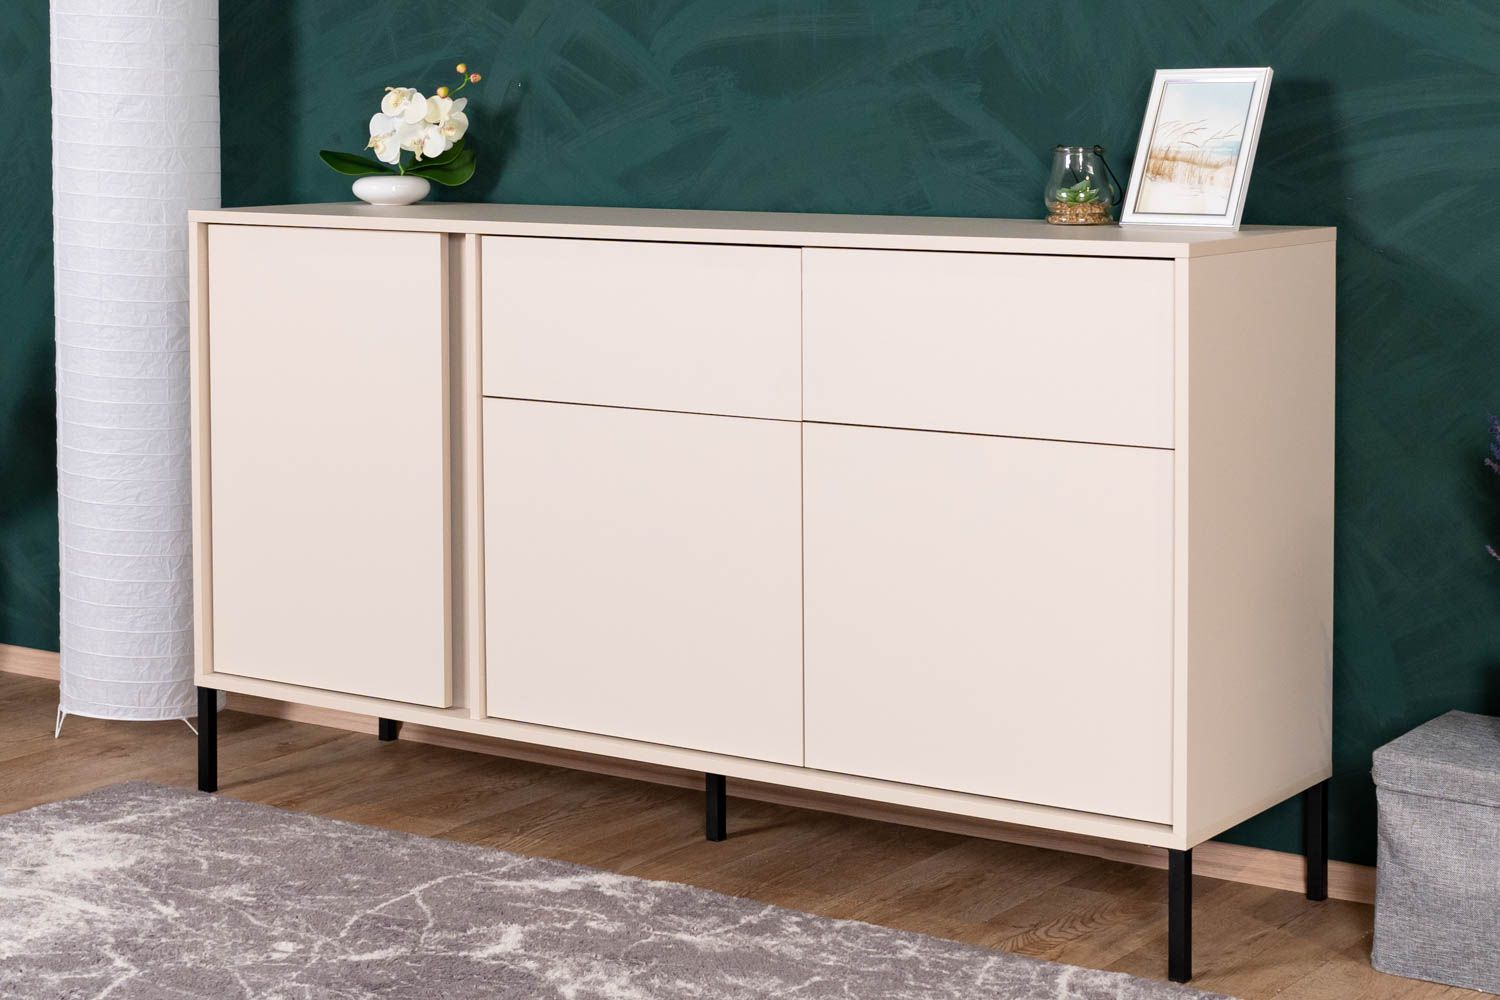 Sideboard with three doors Zaghouan 05, color: Beige - Dimensions: 81.5 x 153 x 39.5 cm (H x W x D), with two drawers